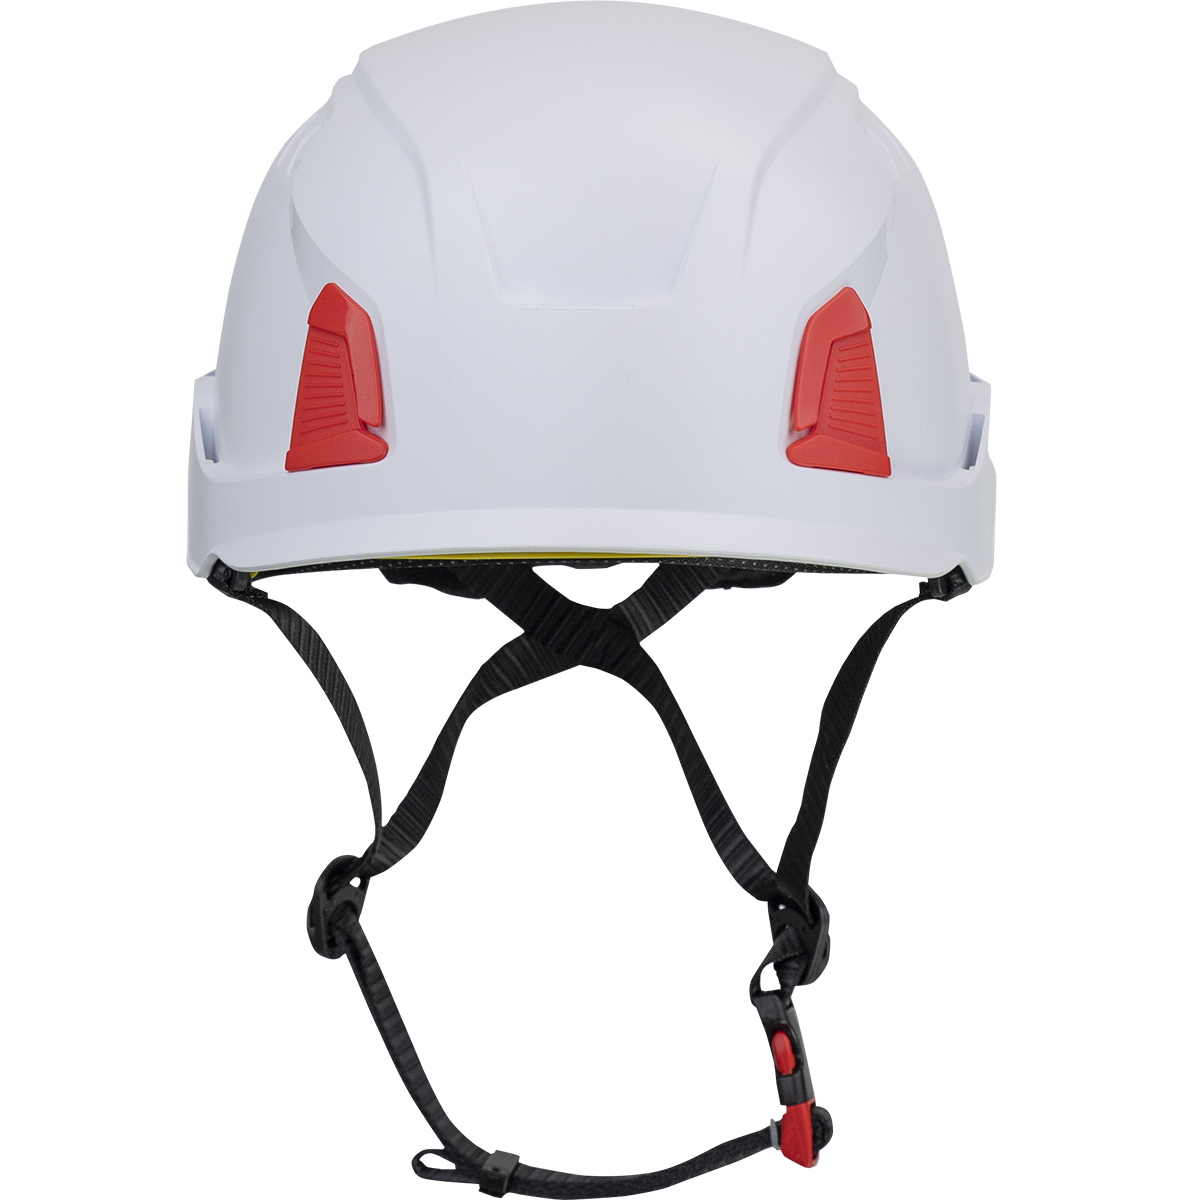 PIP® 280-HP1491RM-01 Traverse™ Industrial Climbing Helmet with Mips® Technology, Polycarbonate/ABS Shell, EPS Foam Impact Liner, HDPE Suspension, Wheel Ratchet Adjustment and 4-Point Chin StrapTYPE II, White